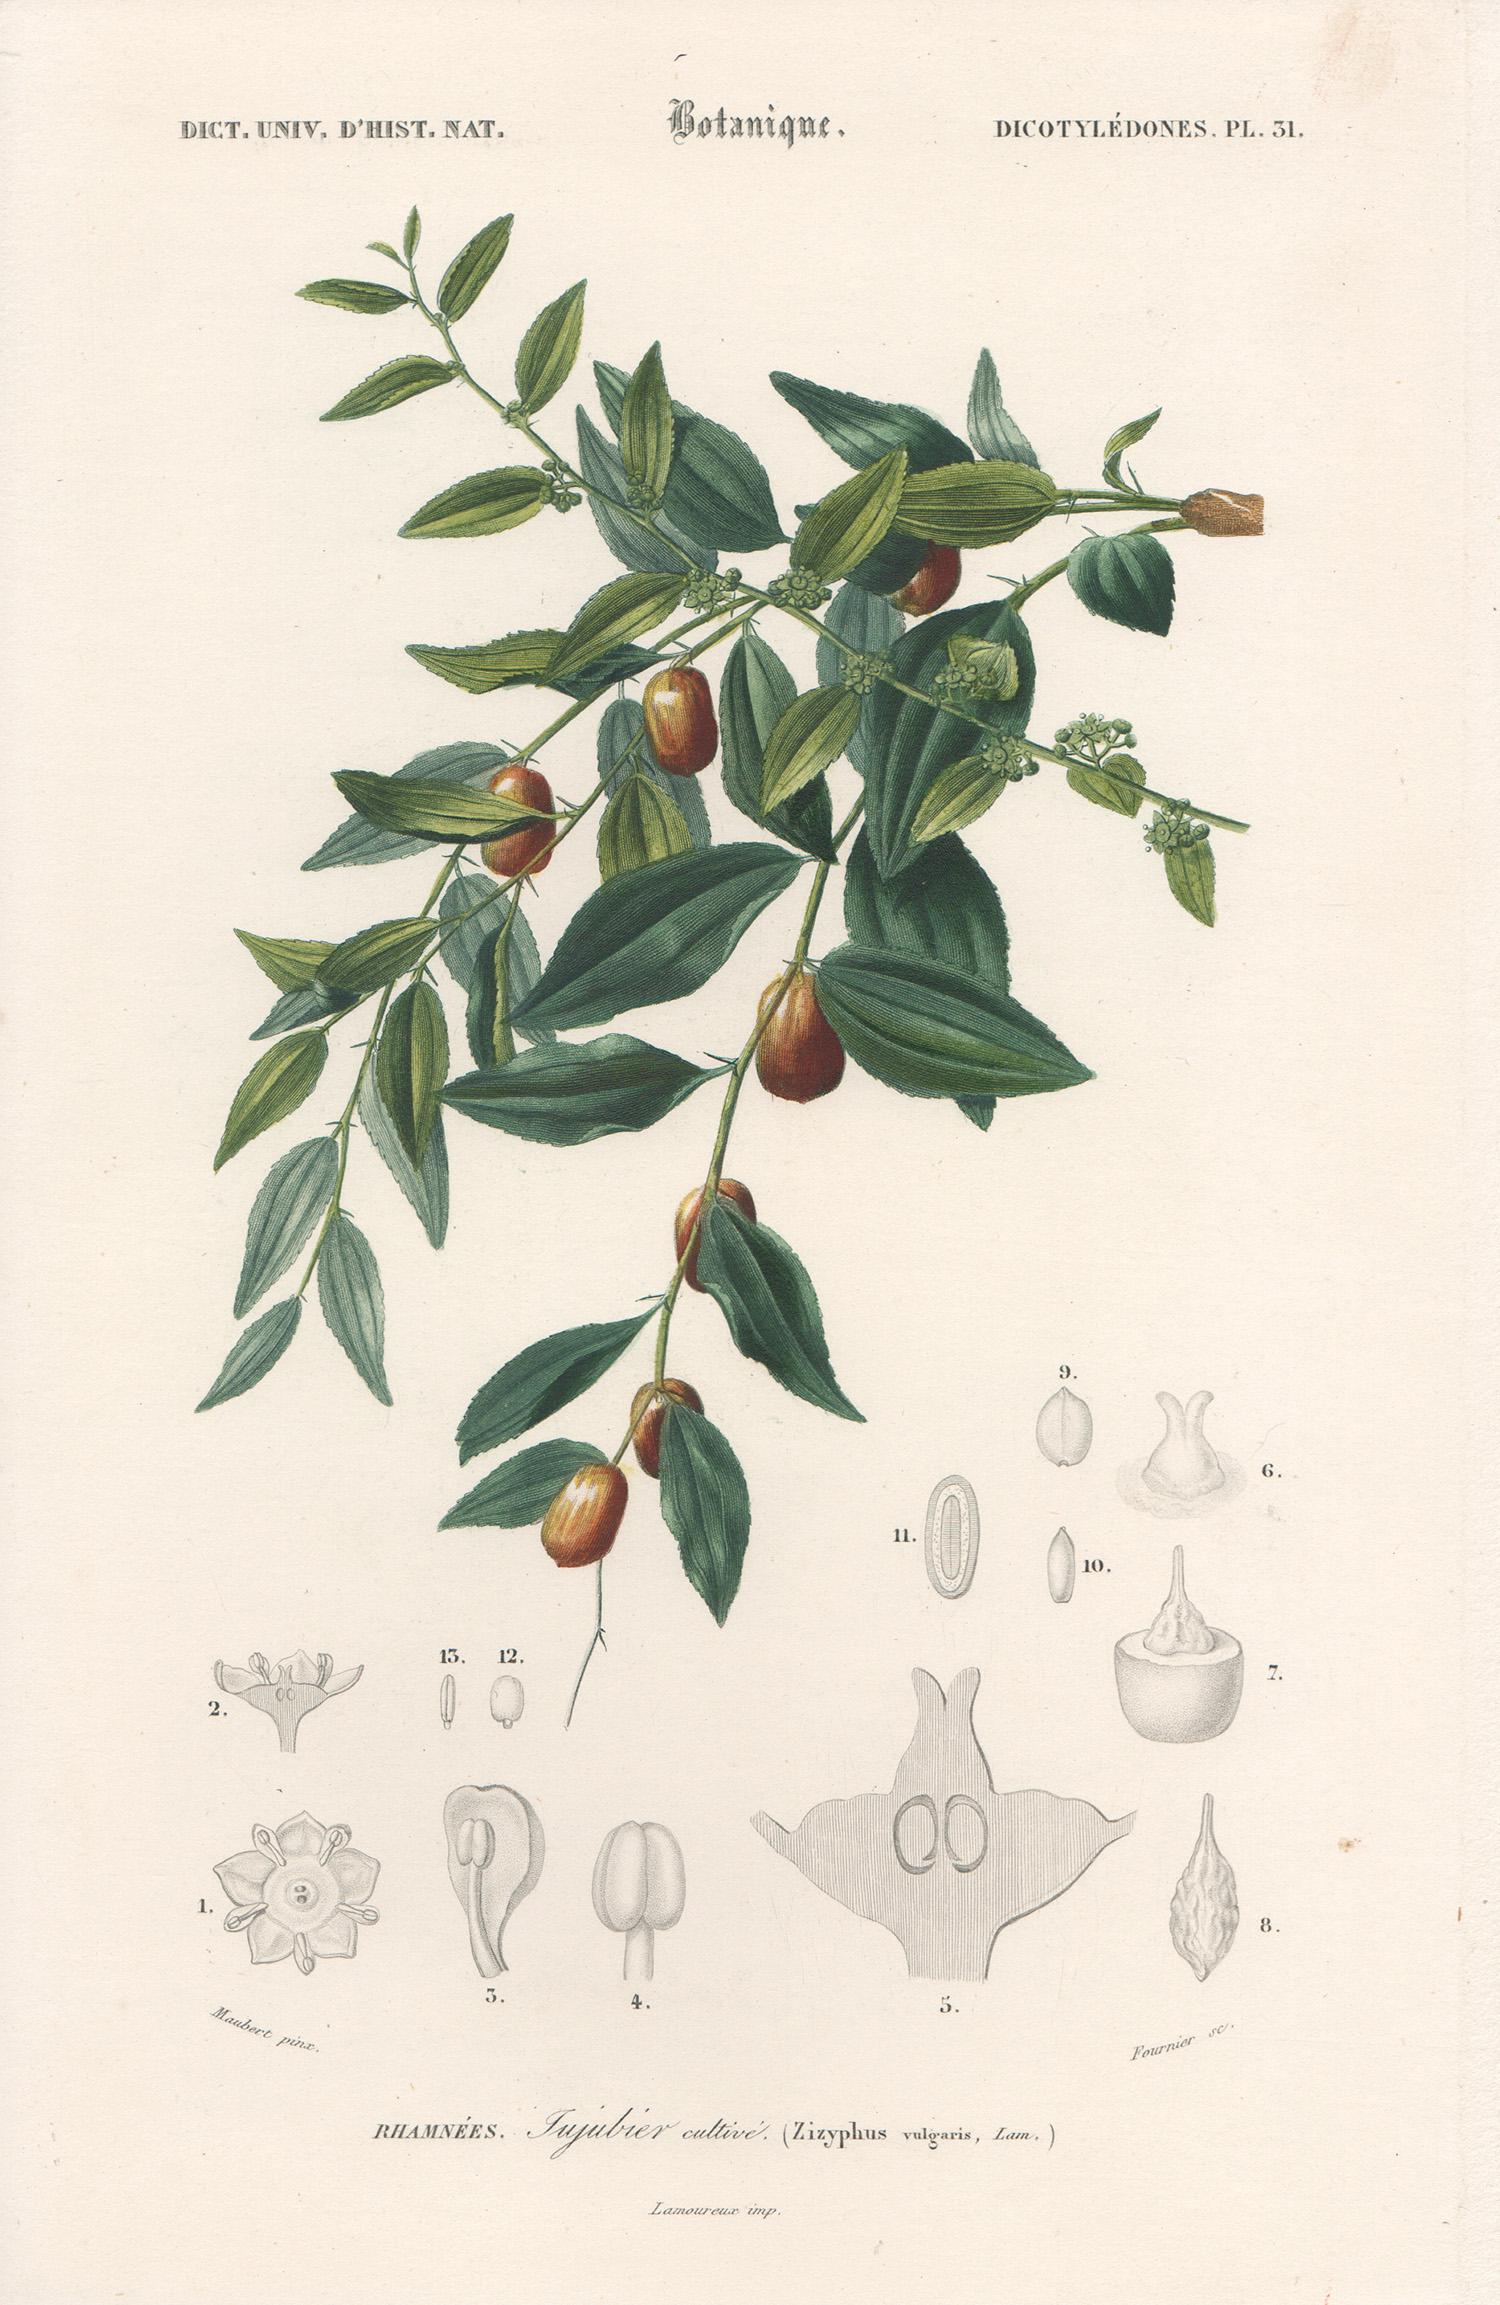 Unknown Still-Life Print - Jujubier cultive (Zizyphus vulgaris), French botanical engraving, 1849